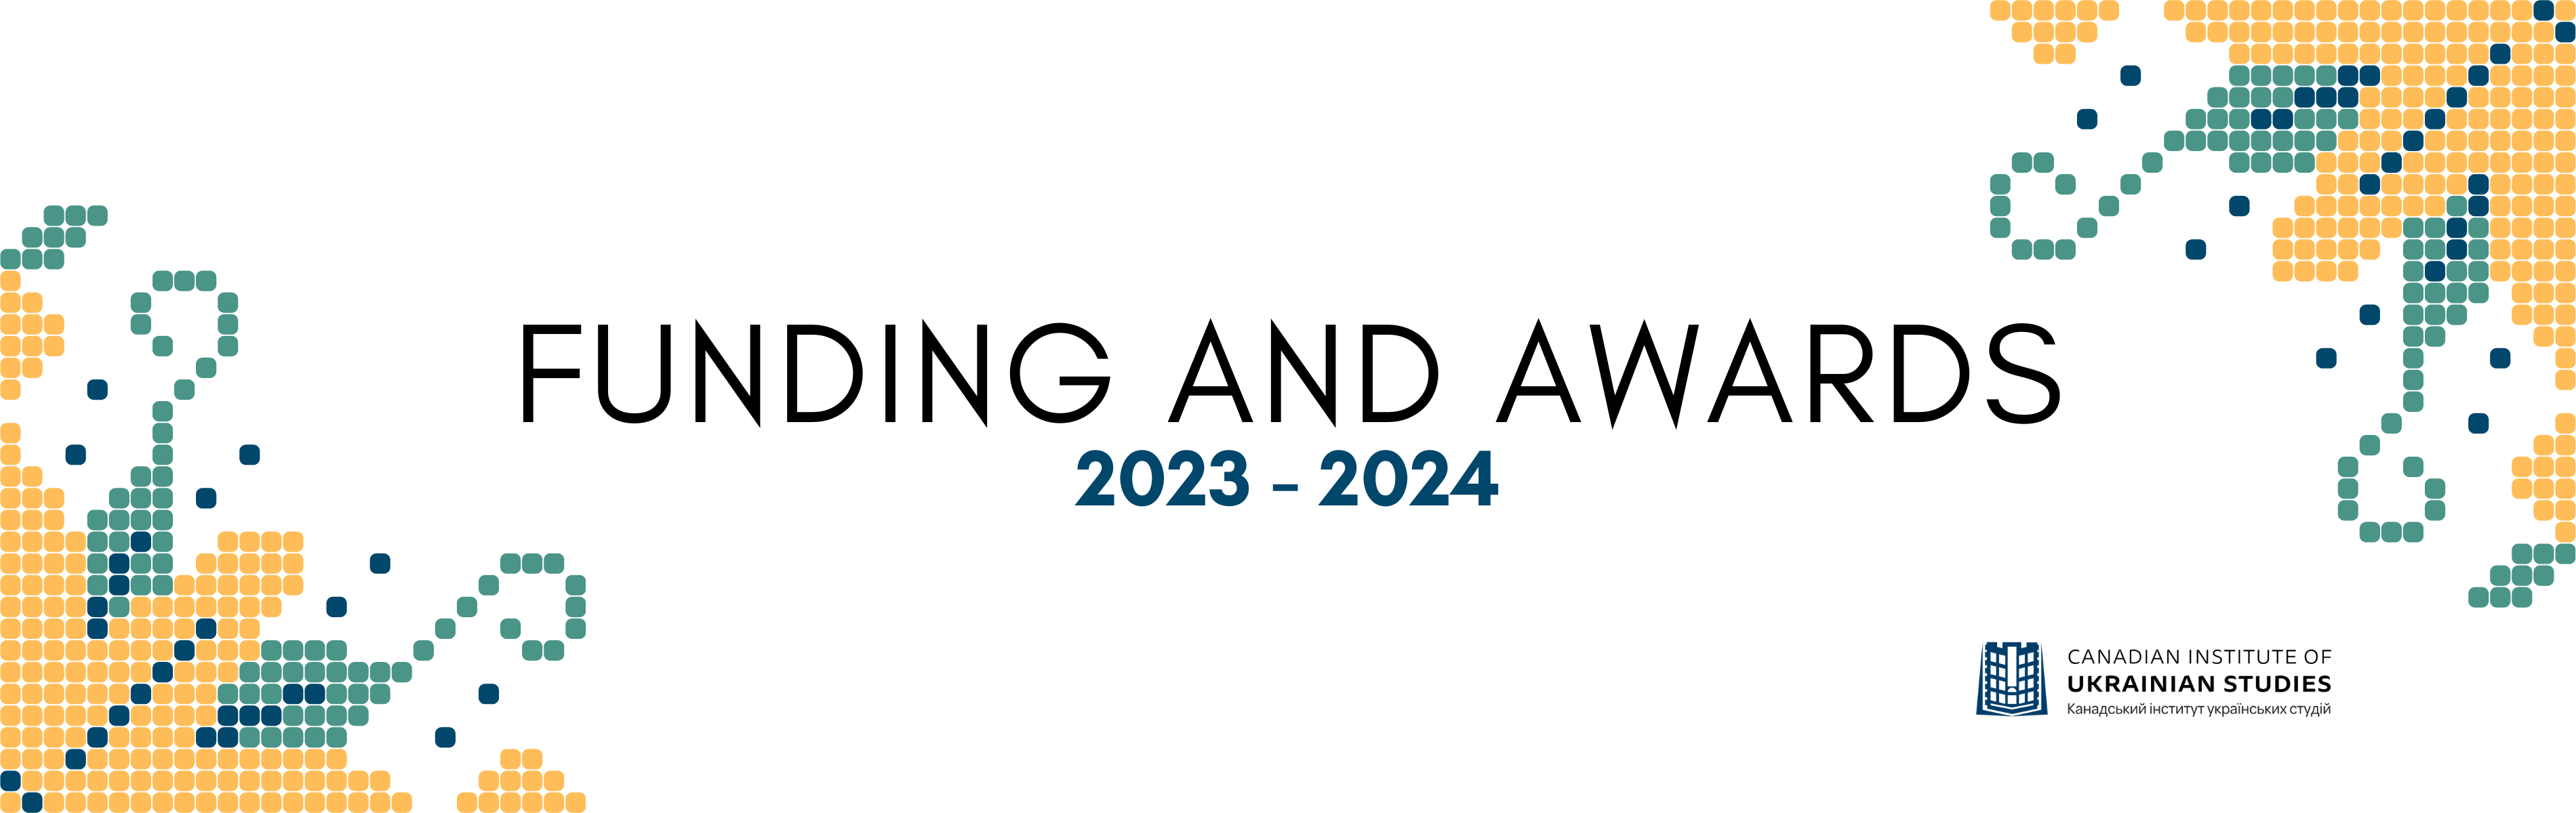 cius-grants-and-awards-2023-24.png